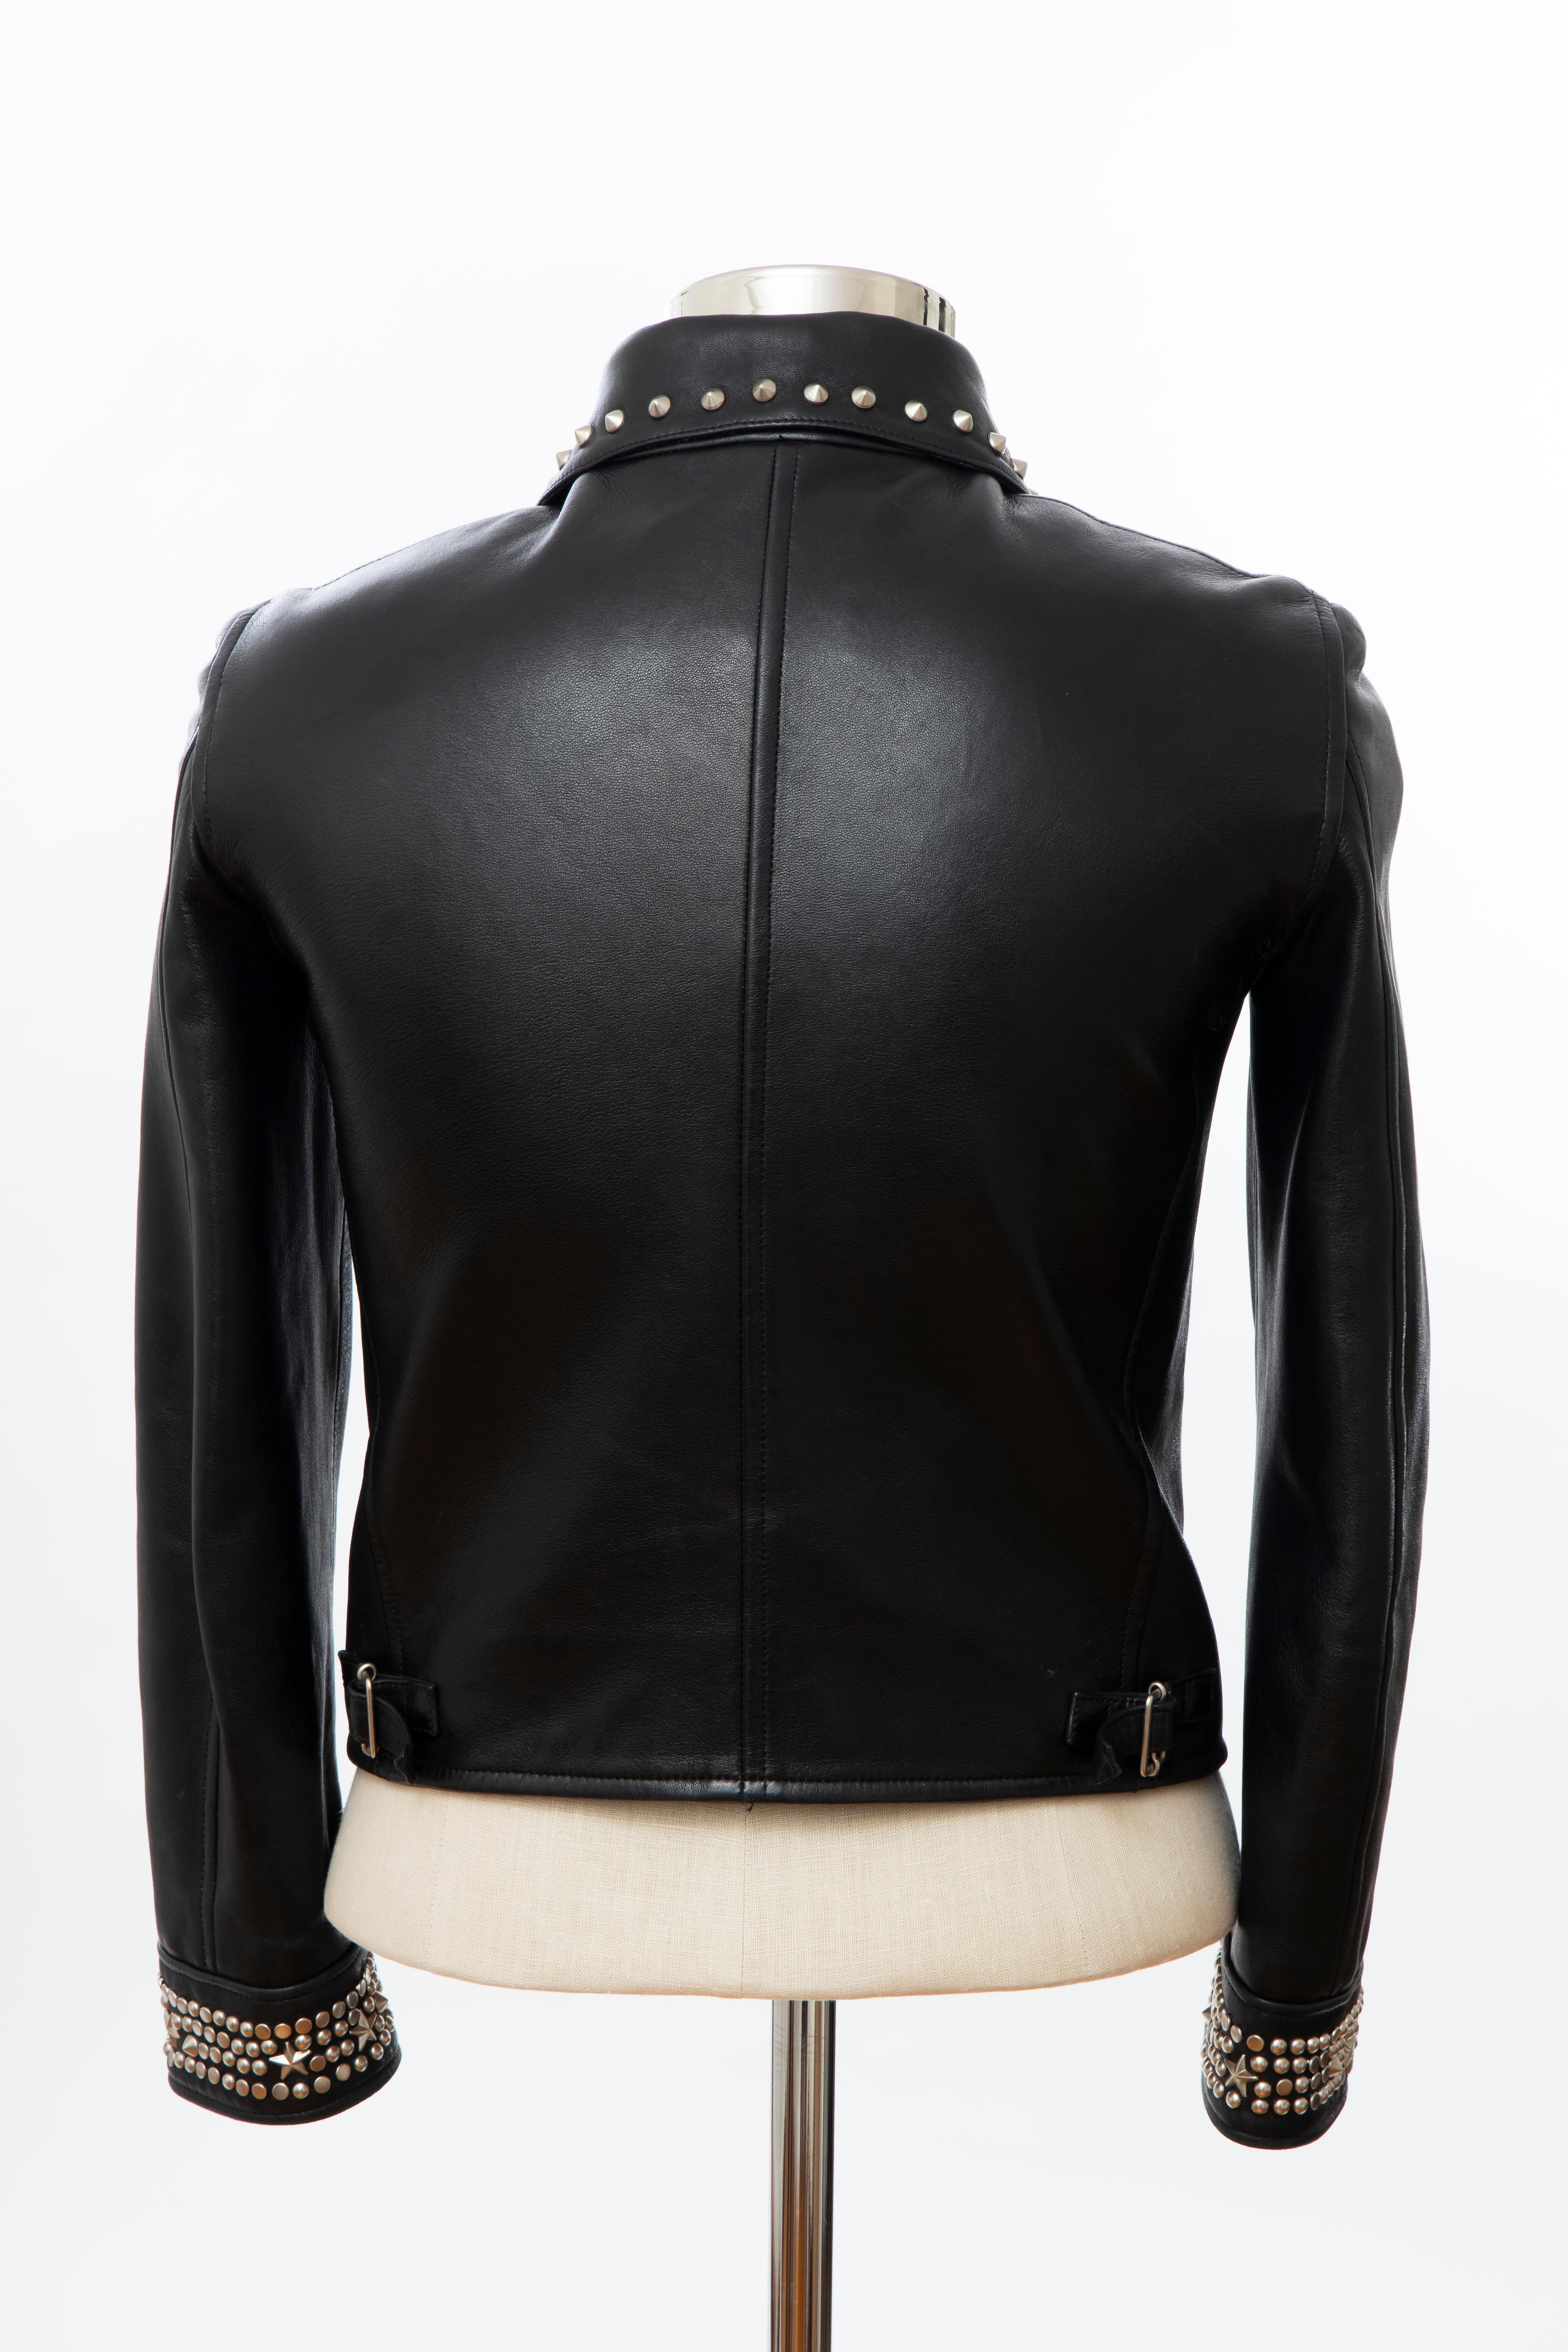 Gianni Versace Black Leather Jacket Pewter Stud Collar & Cuffs,  Circa: 1990's For Sale 7